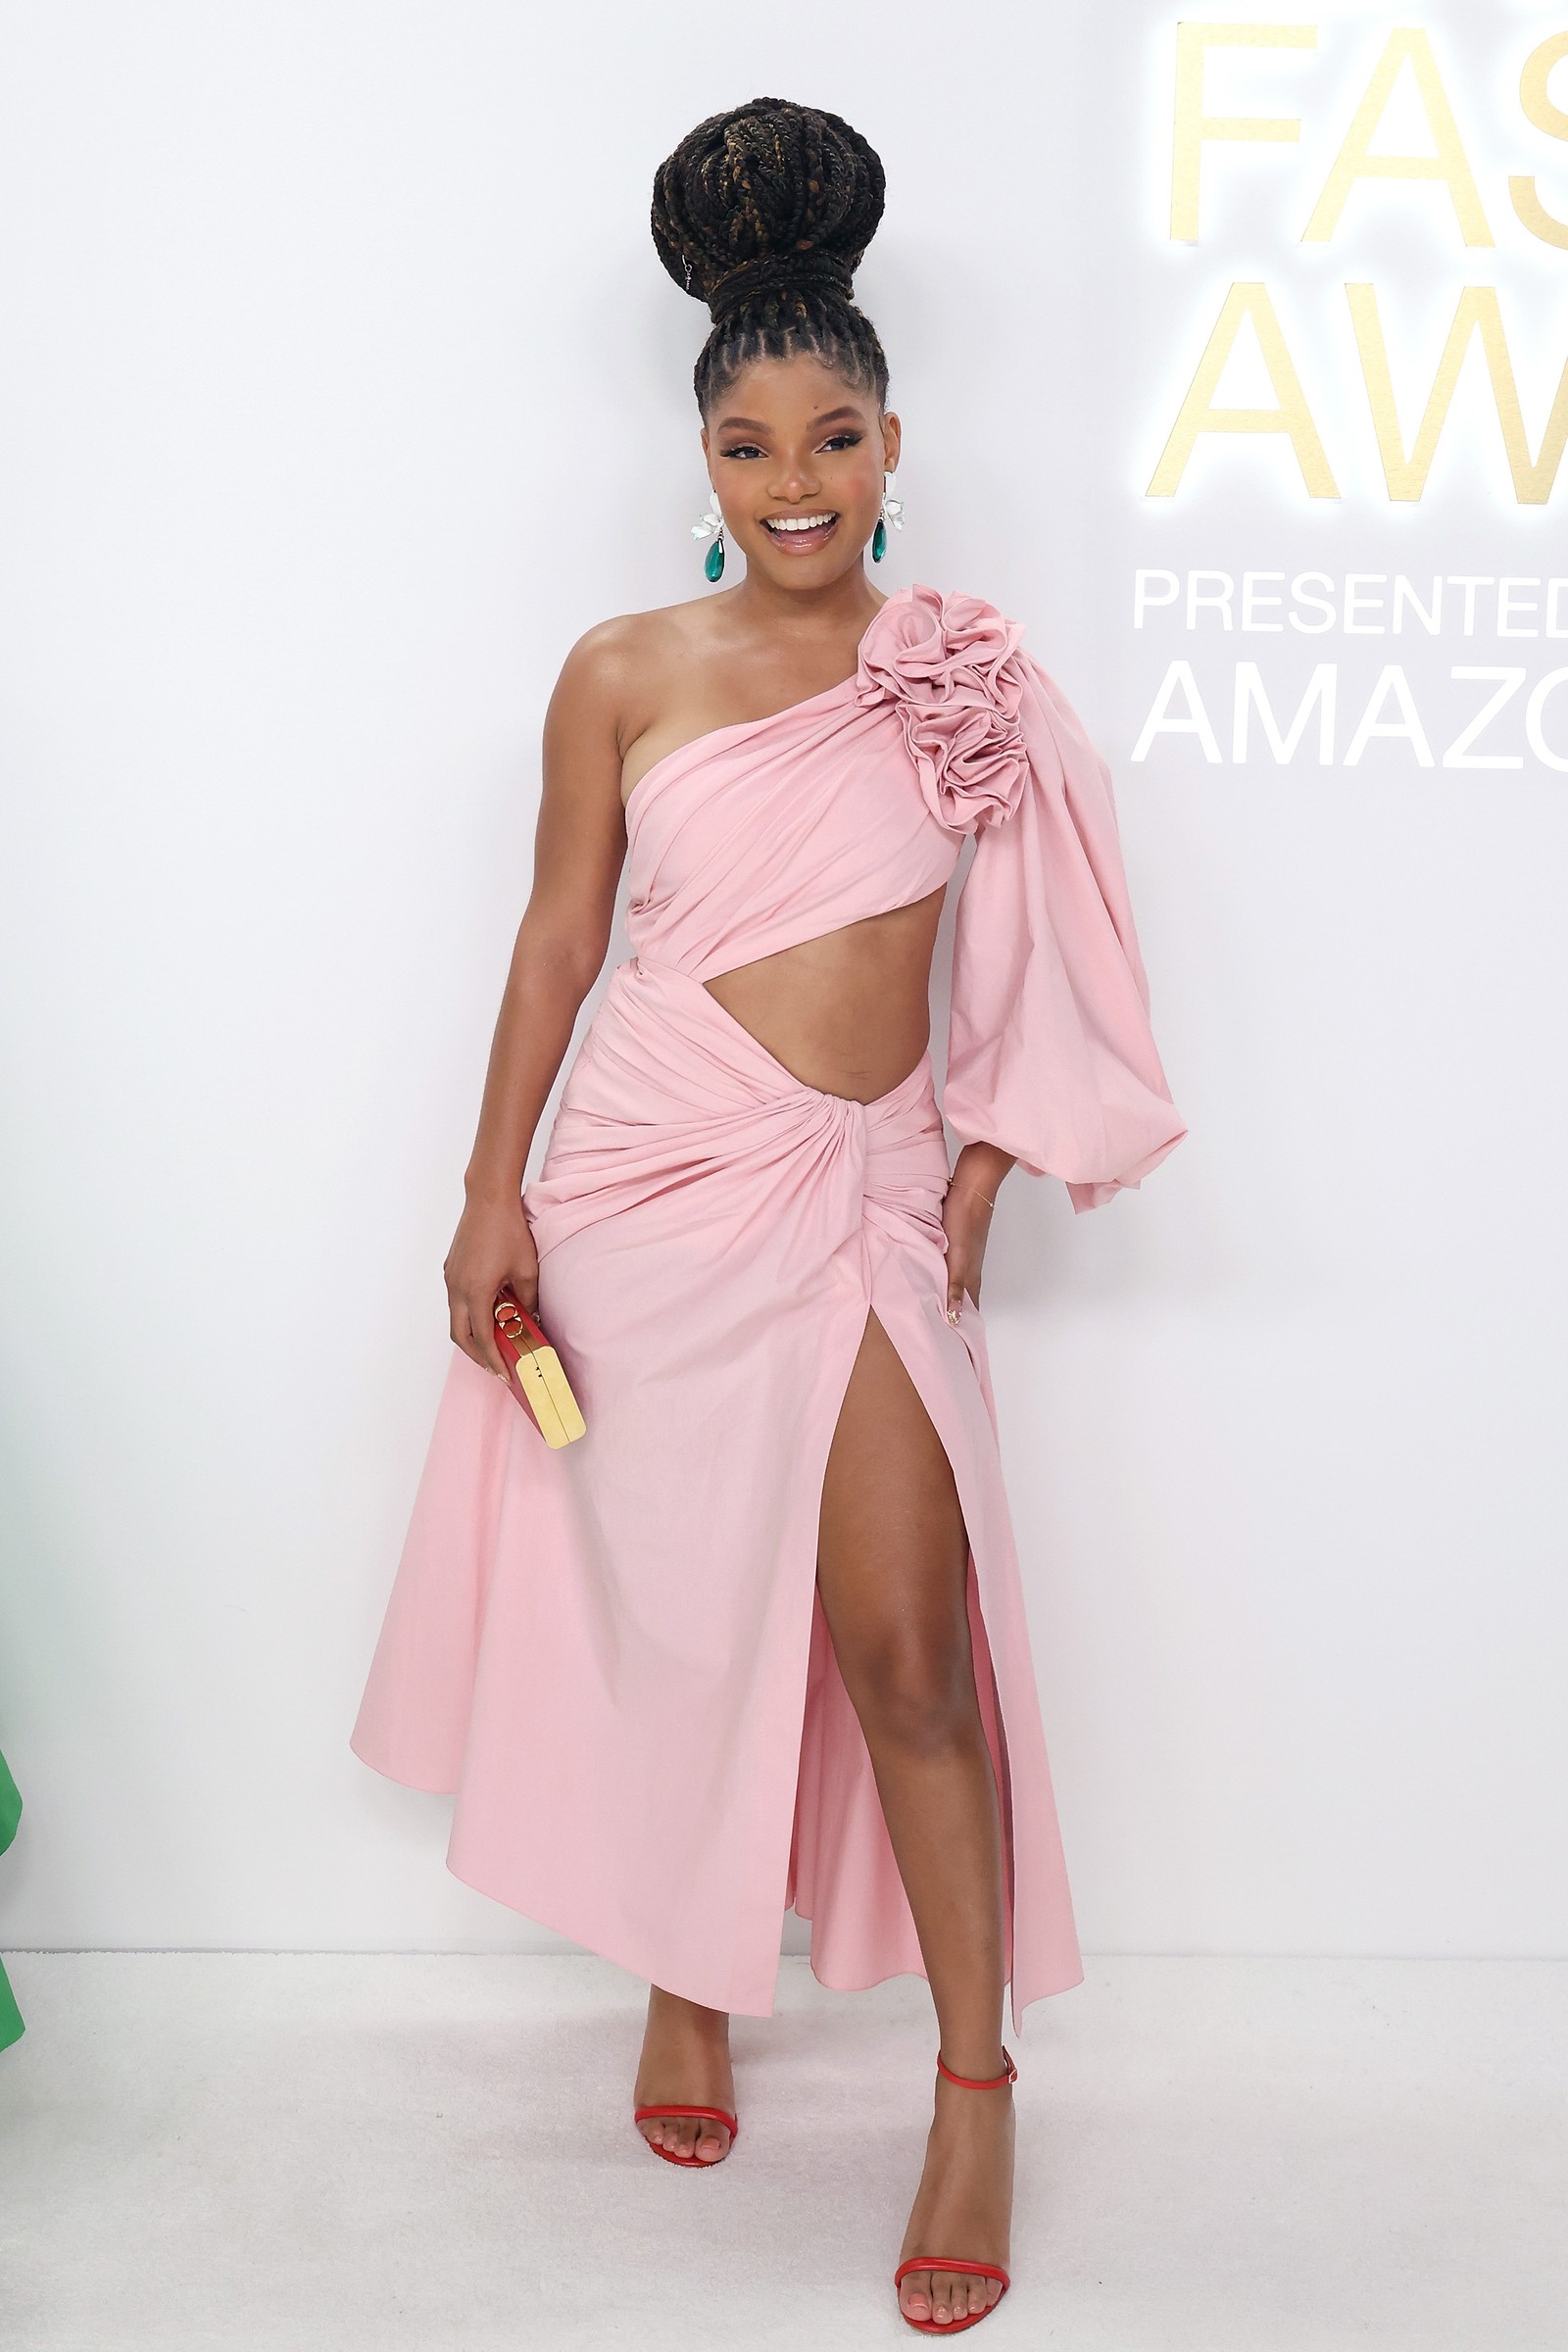 Halle Bailey attends the 2022 CFDA Awards at Casa Cipriani on November 07, 2022 in New York City — Foto: Taylor Hill/FilmMagic